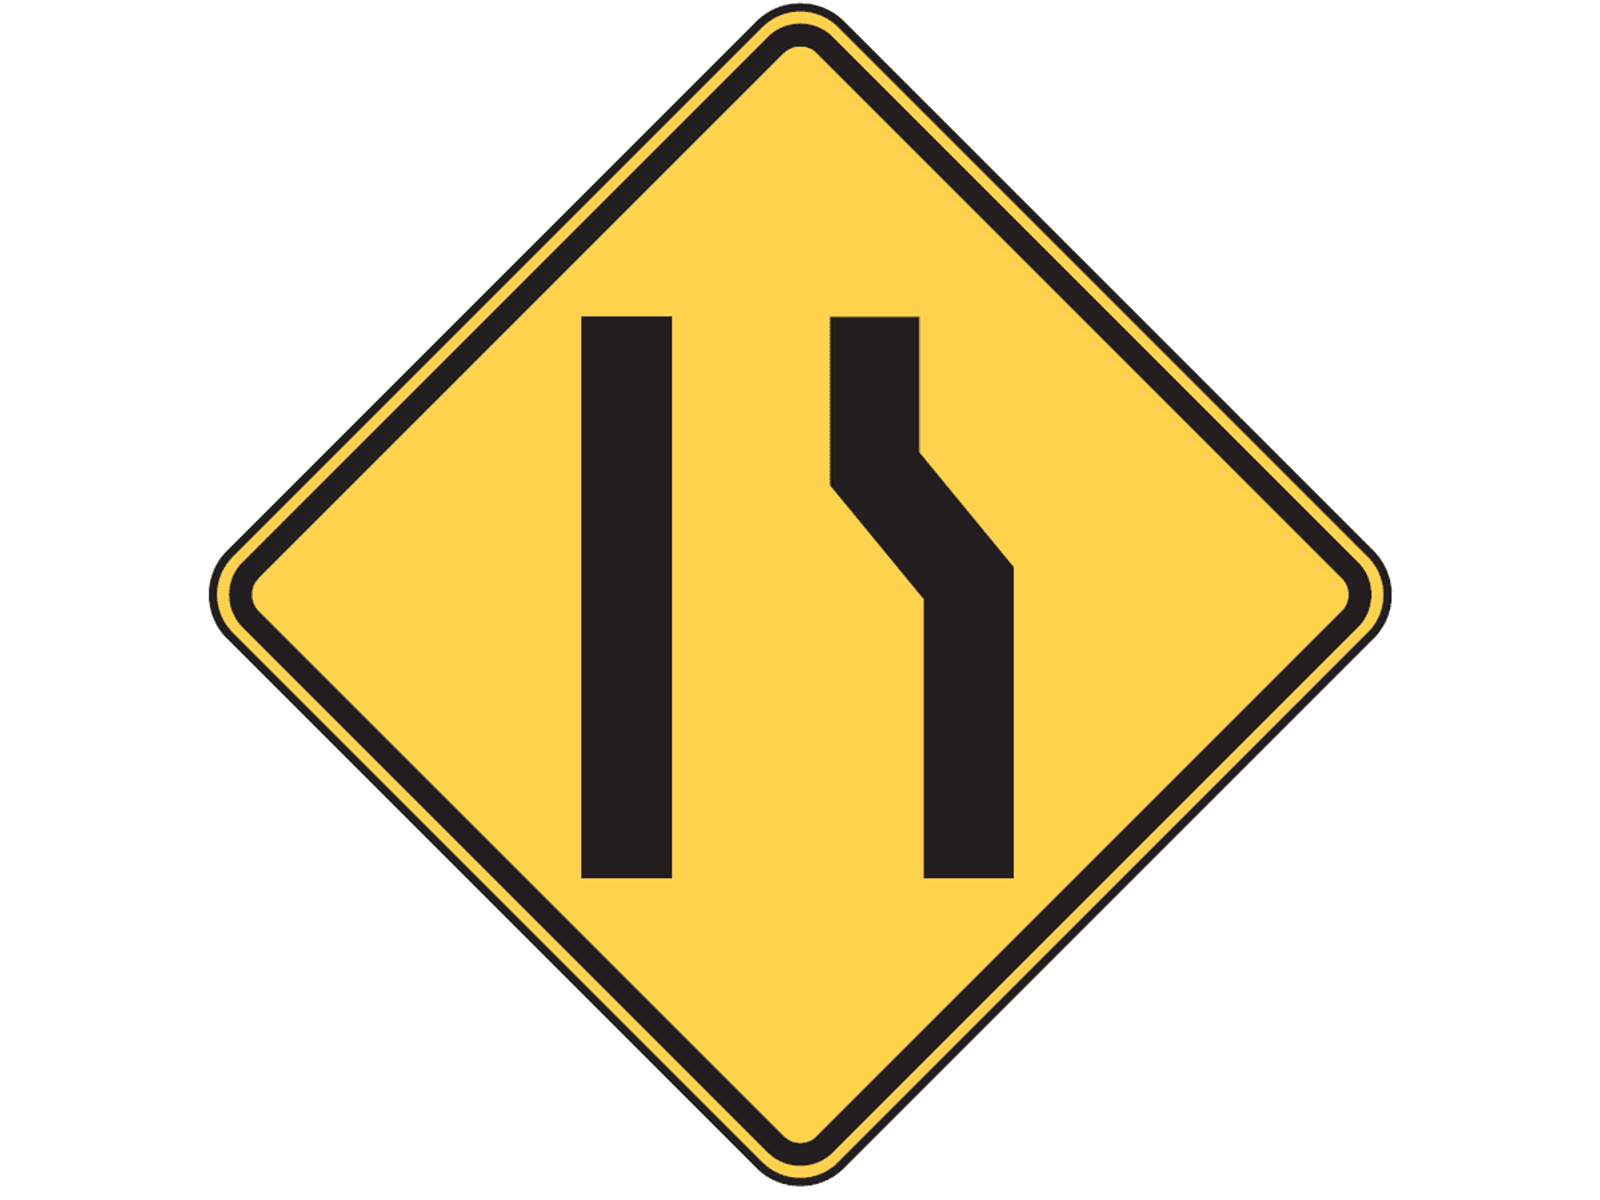 Reduction of Lanes. W4-2a - W4: Lanes and Merges